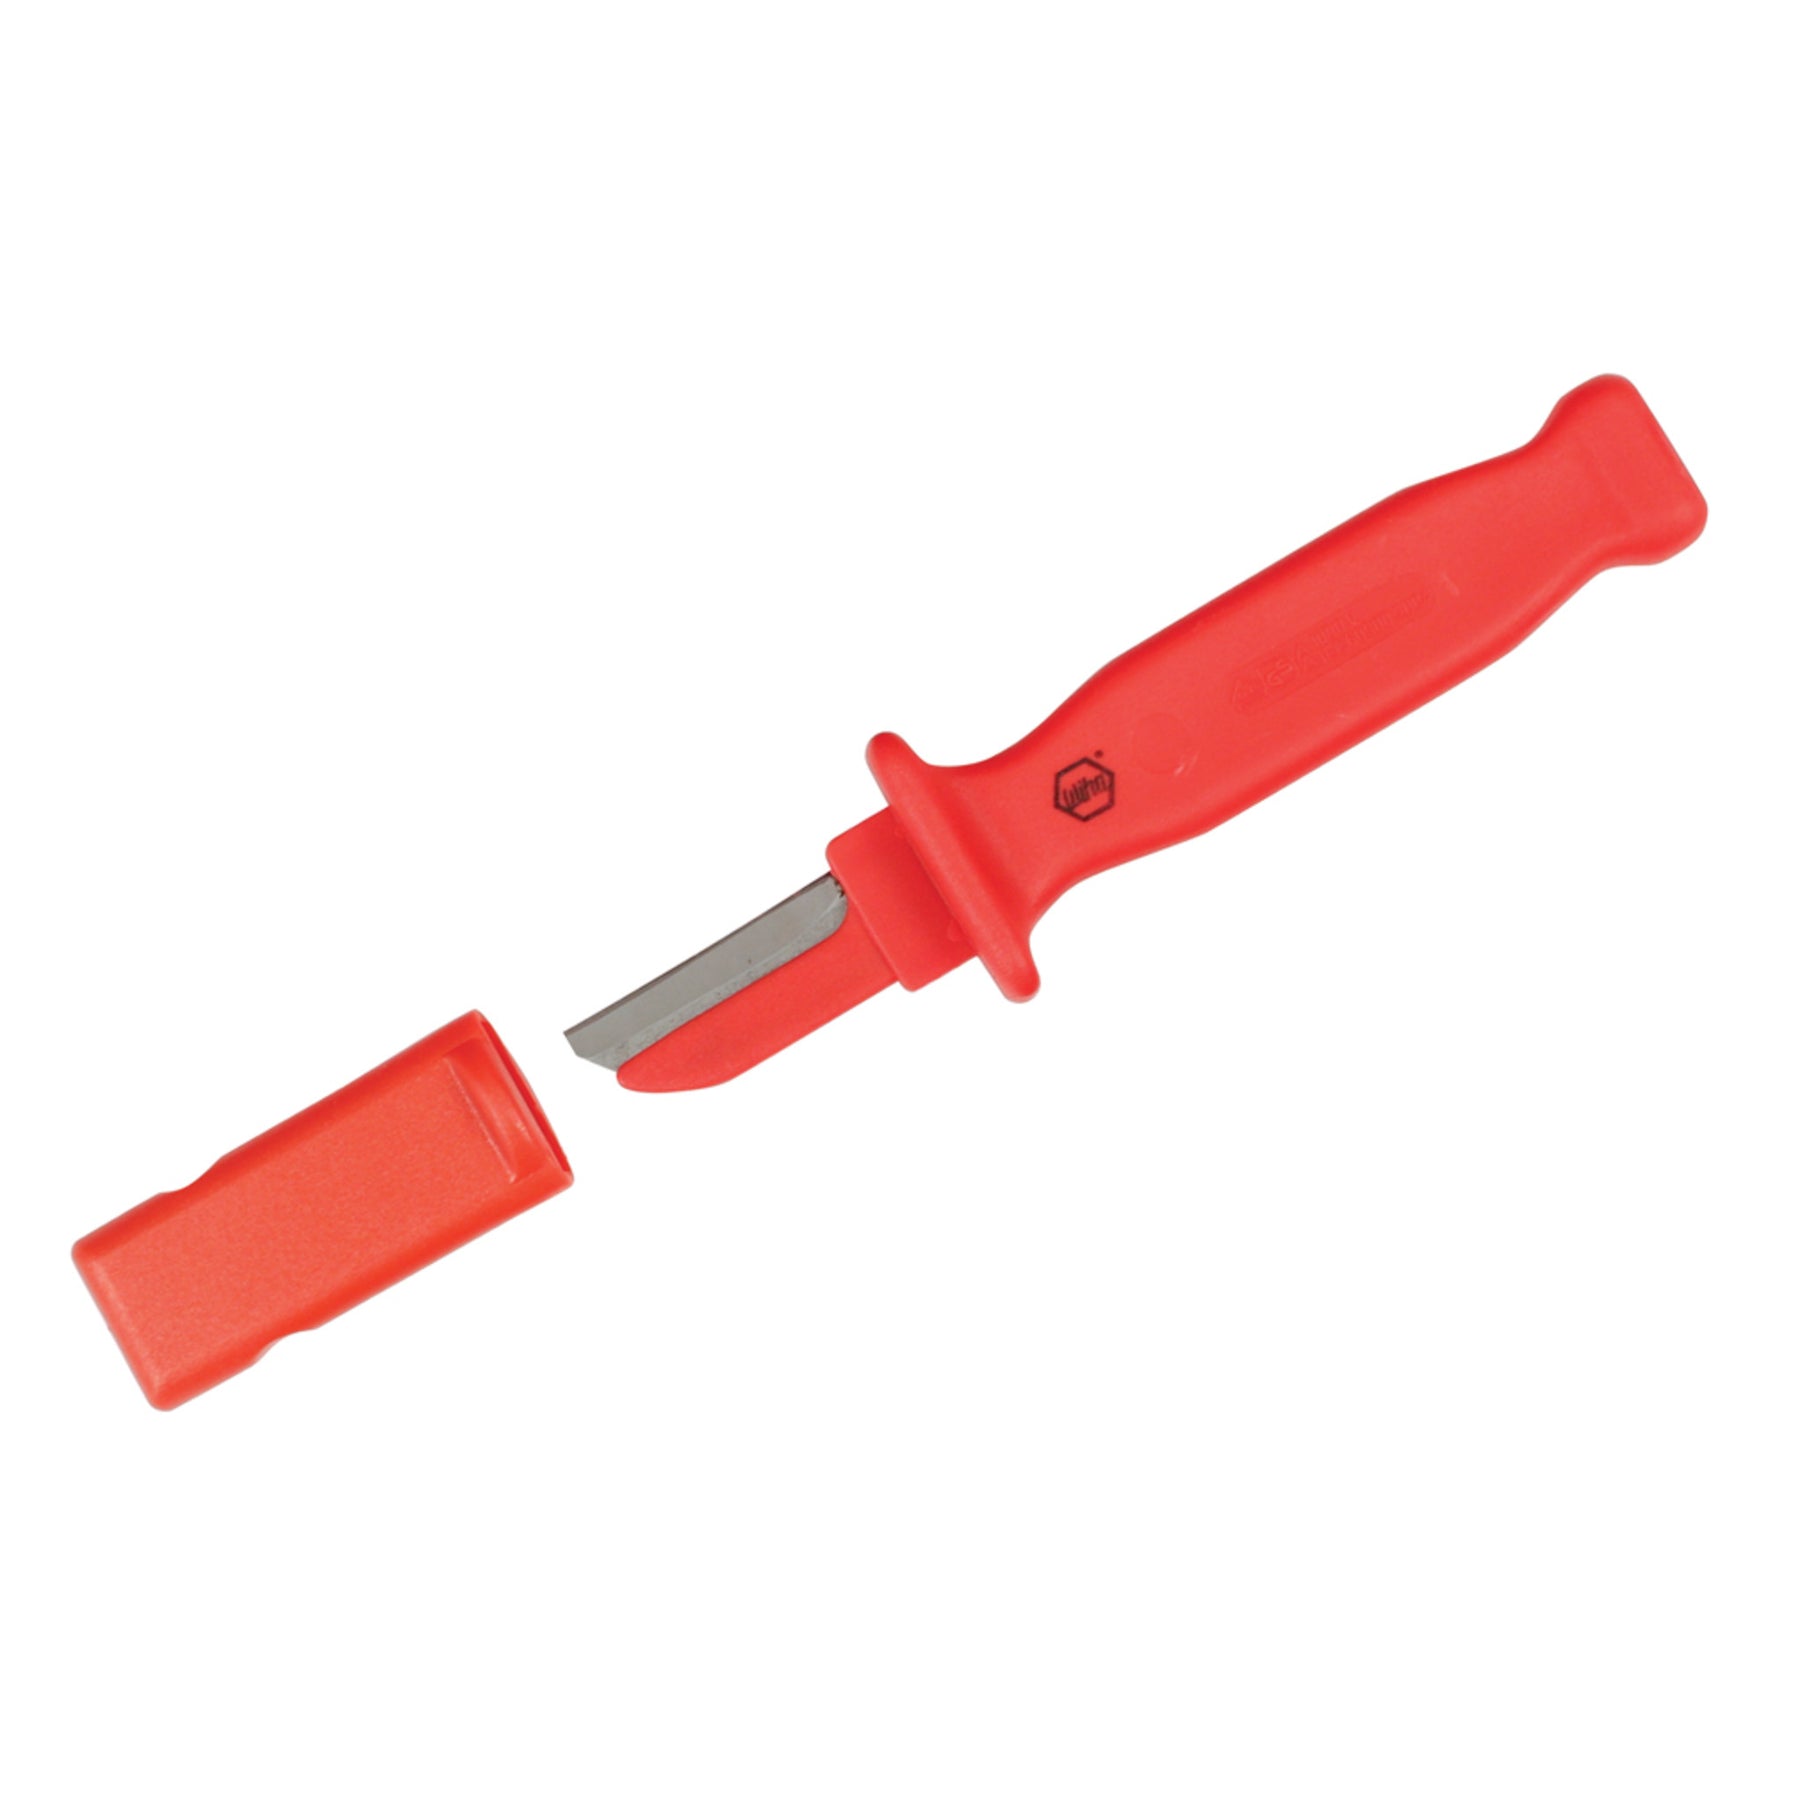 Wiha 15003 Insulated Cable Stripping Knife 50mm